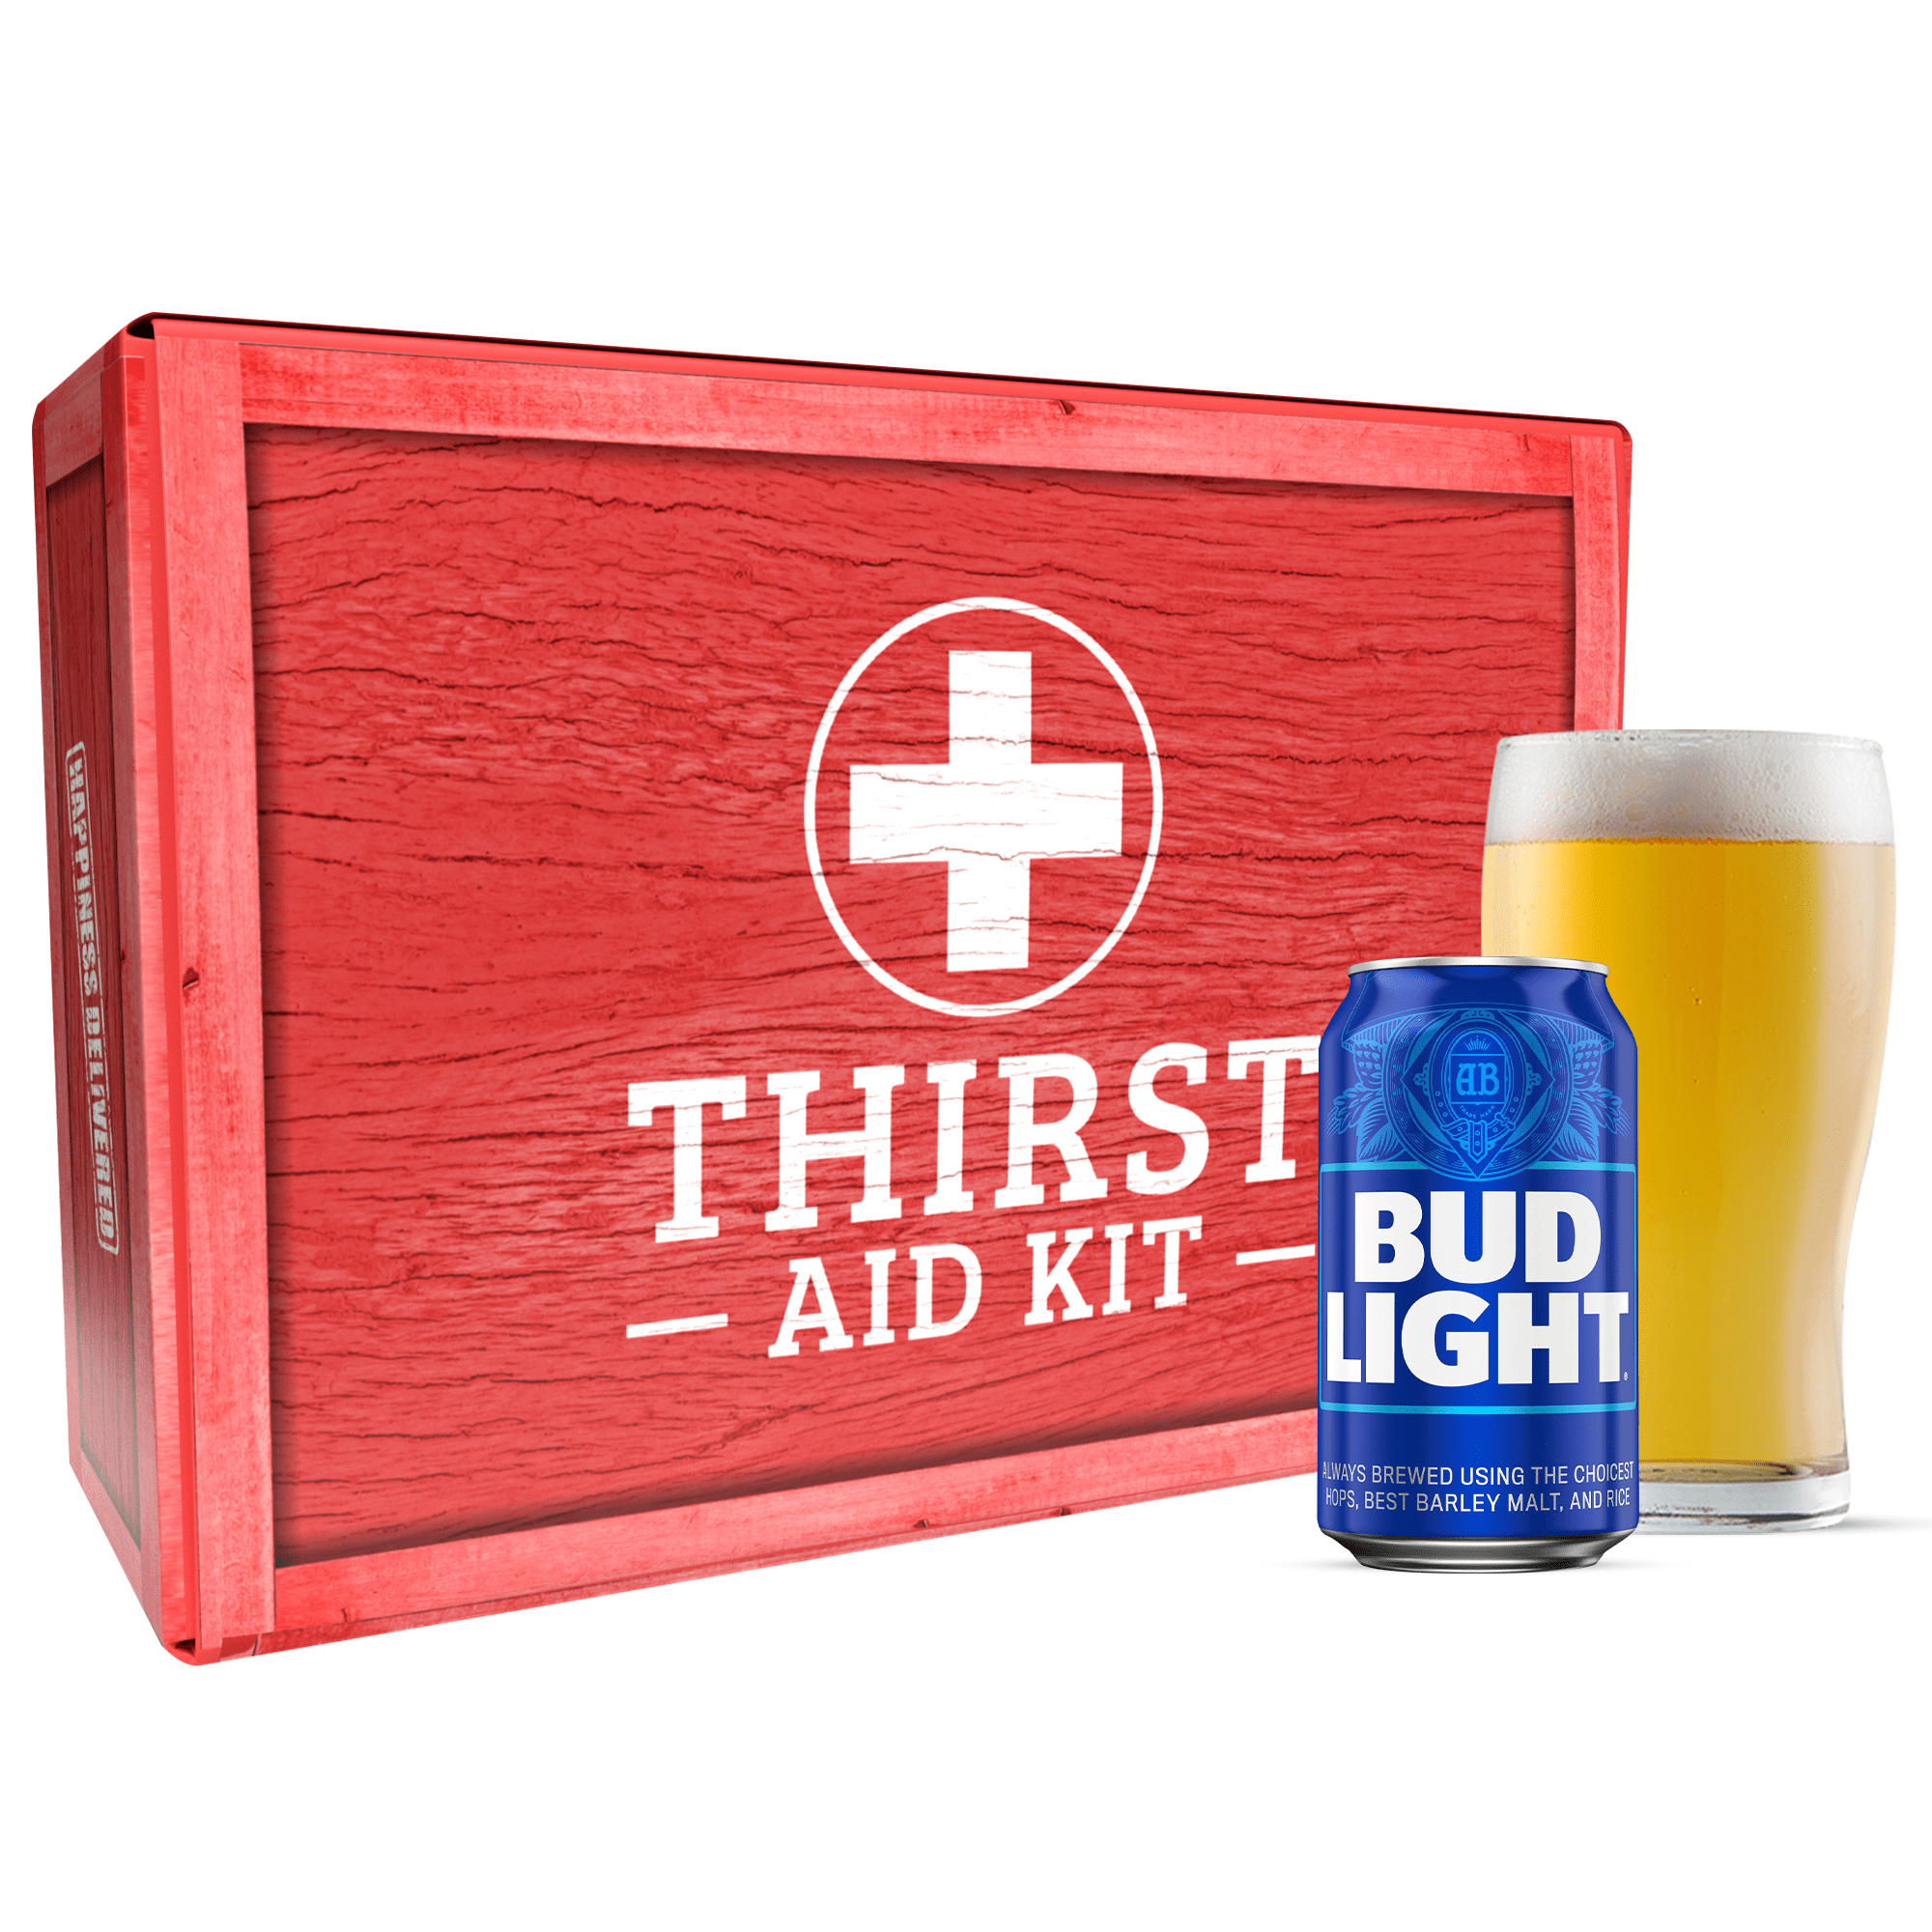 Get Well Gift Basket for Man, Get Well for Men, Bud Light Gifts - www.GiveThemBeer.com